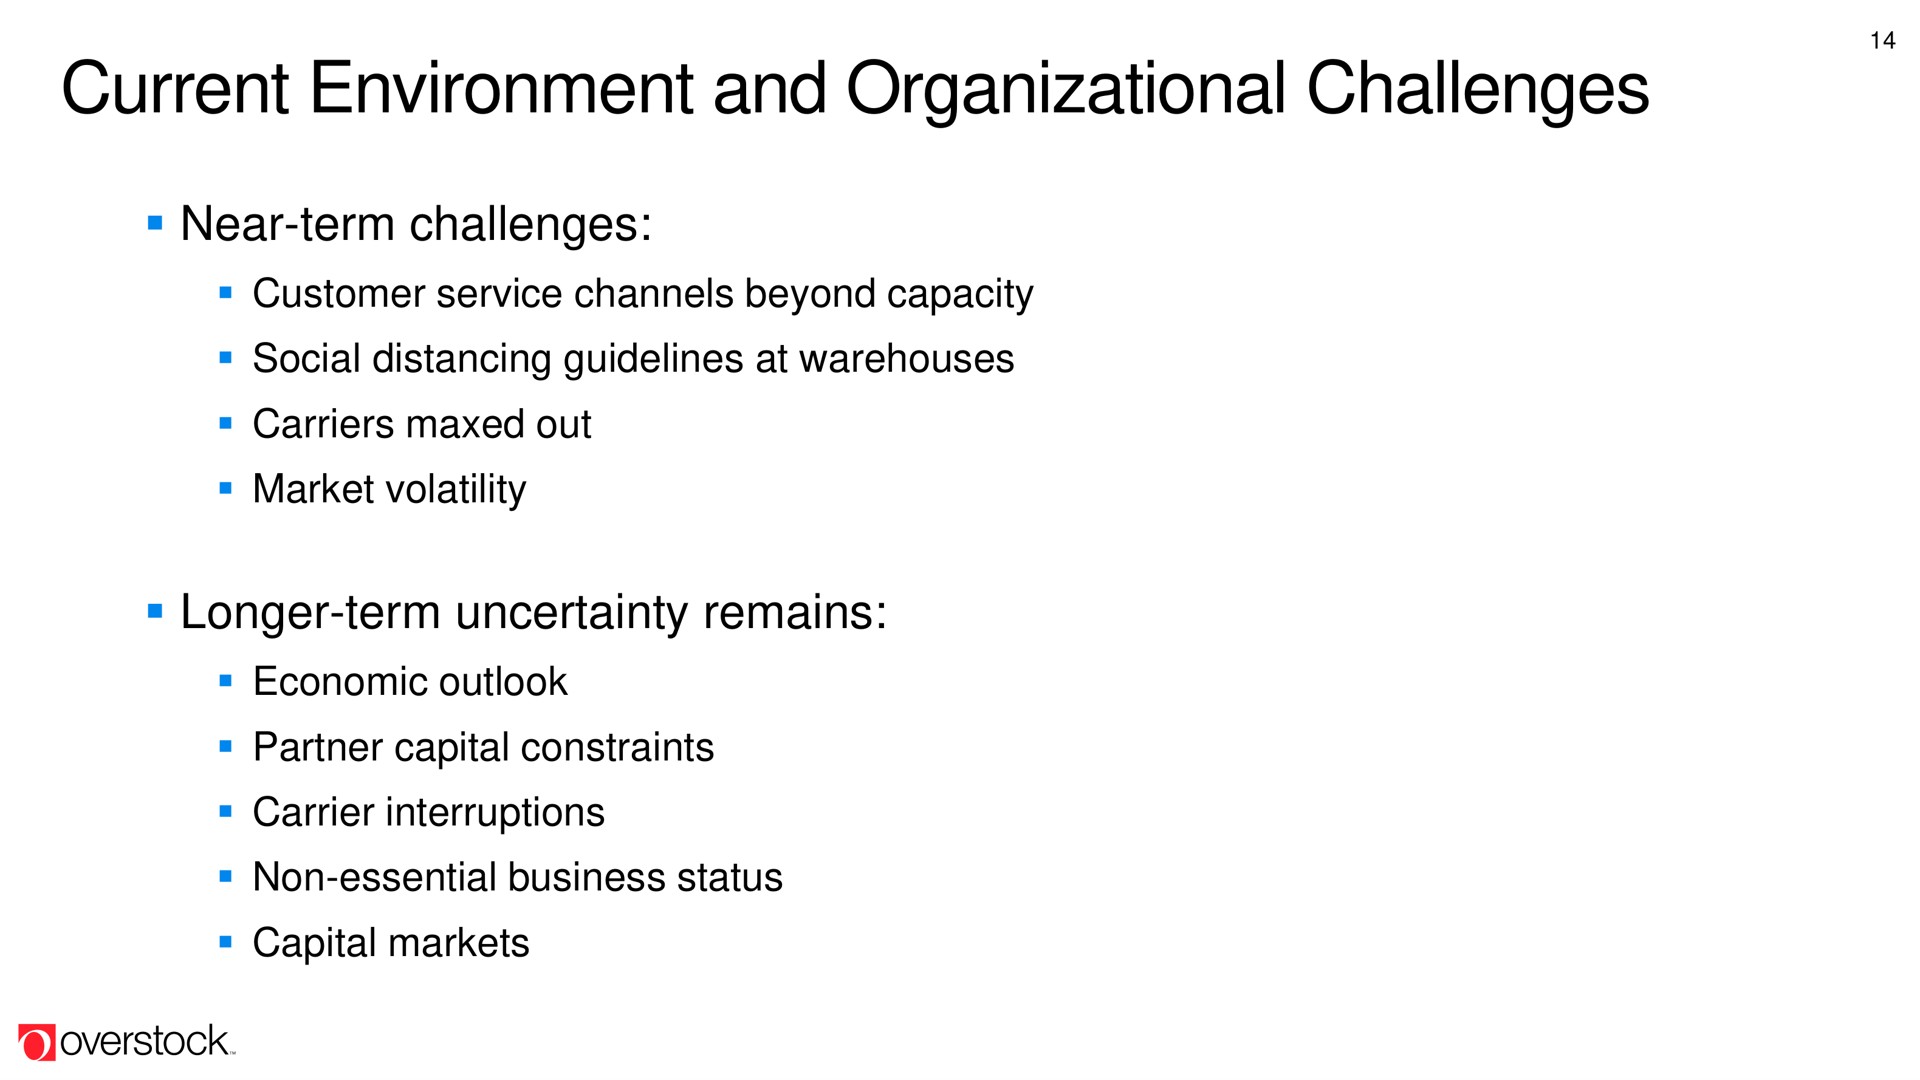 current environment and organizational challenges | Overstock